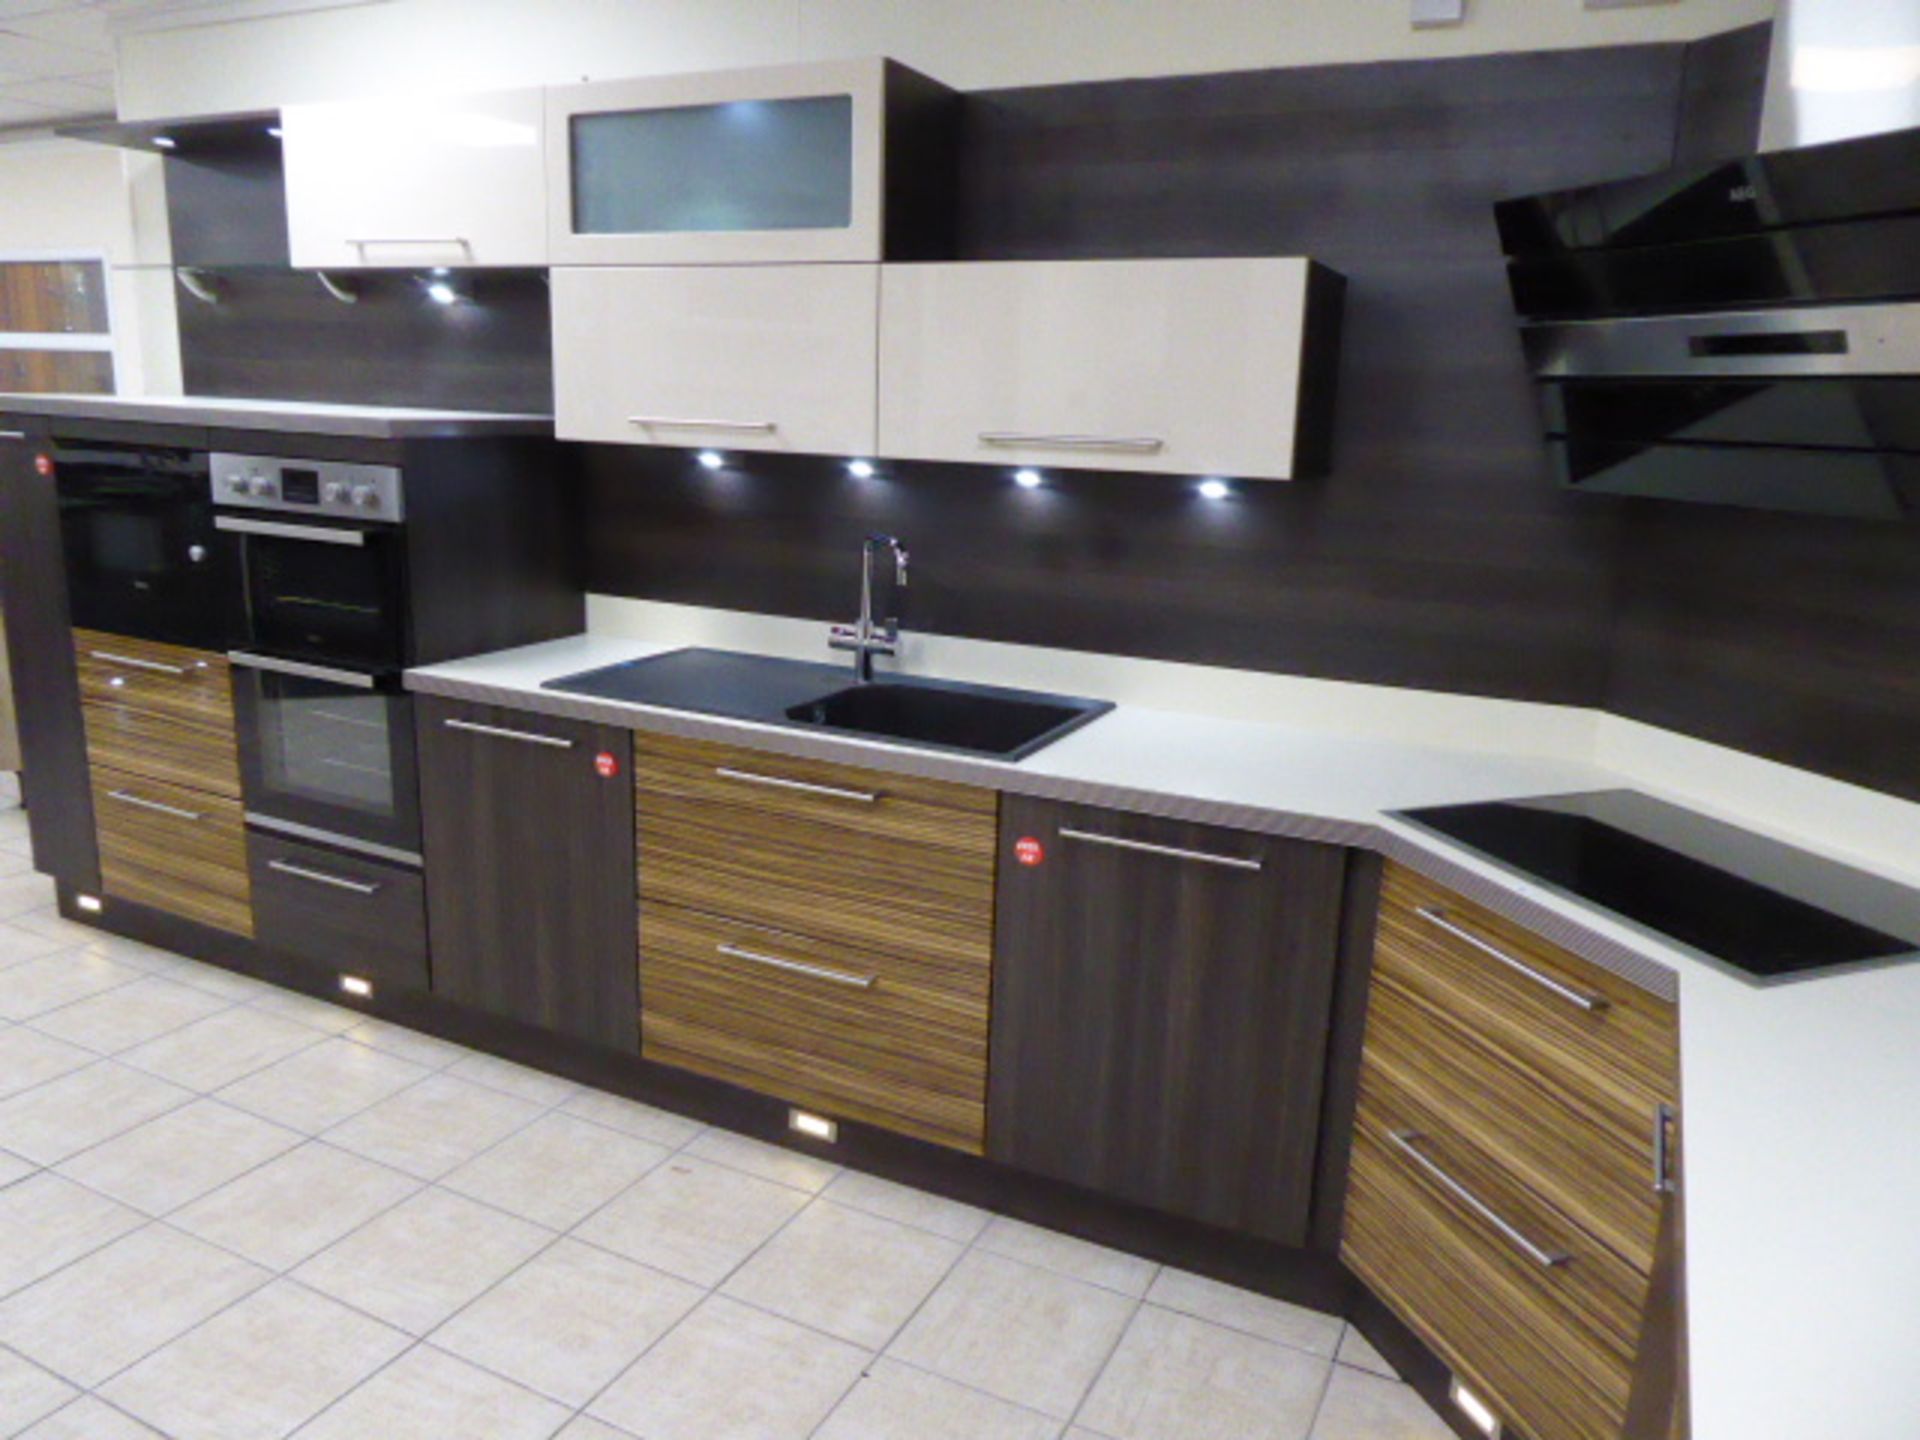 Large Alto gloss mushroom, gloss cappuccino, gloss Sibrano and Sienna kitchen with off white - Image 6 of 24